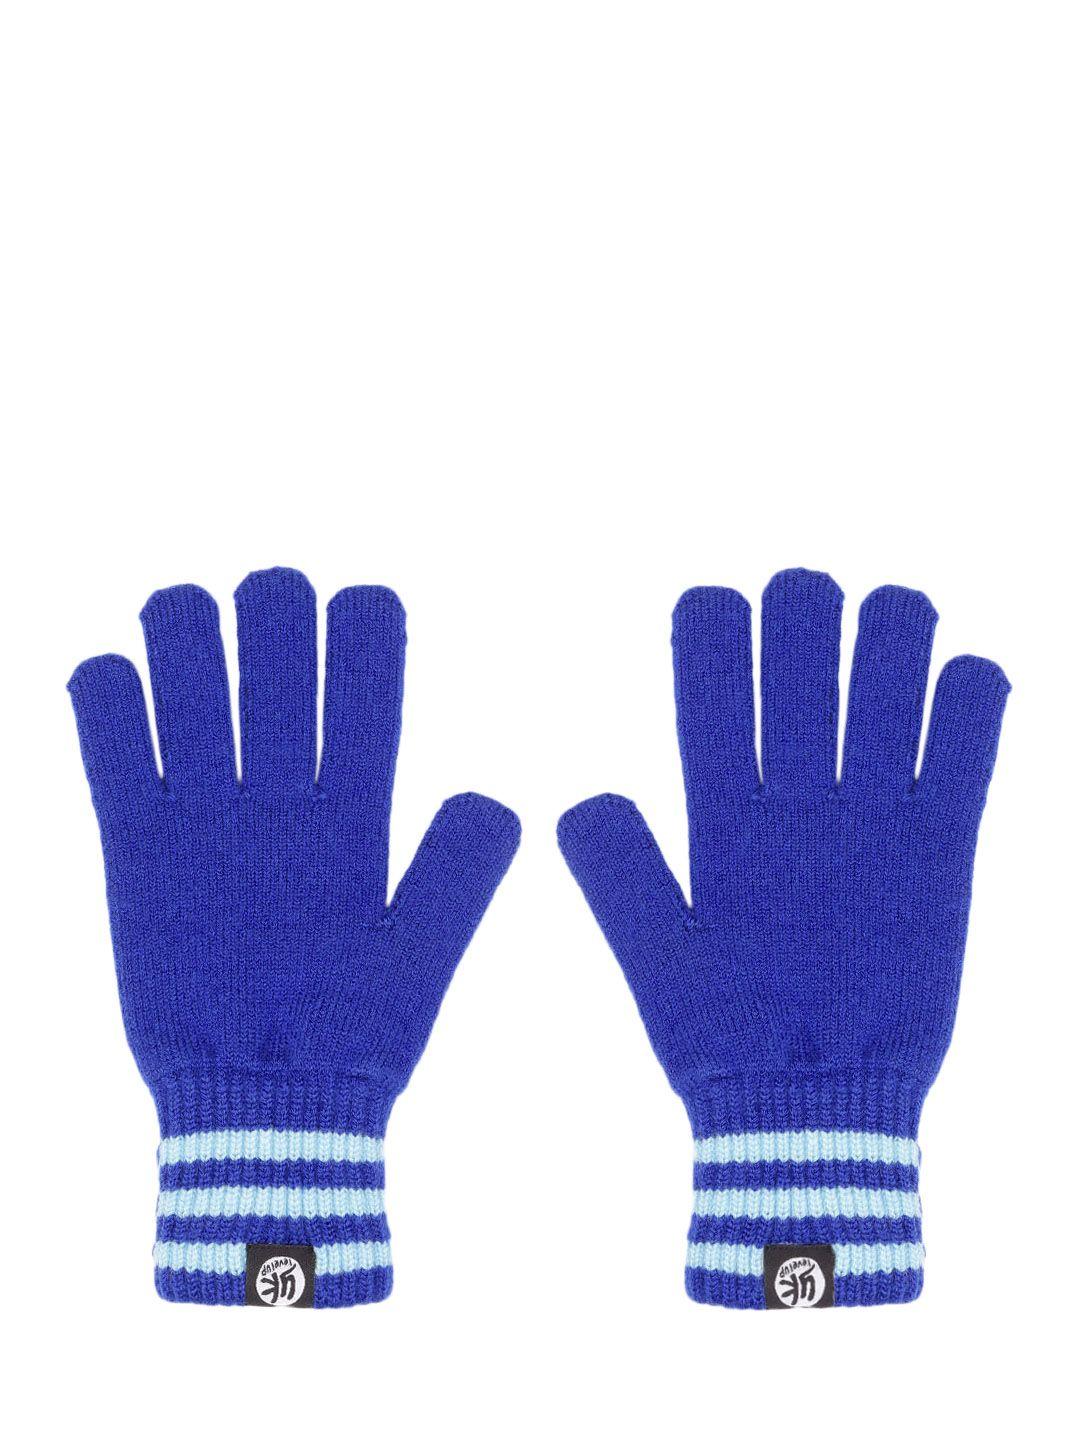 yk kids blue solid hand gloves with striped detail